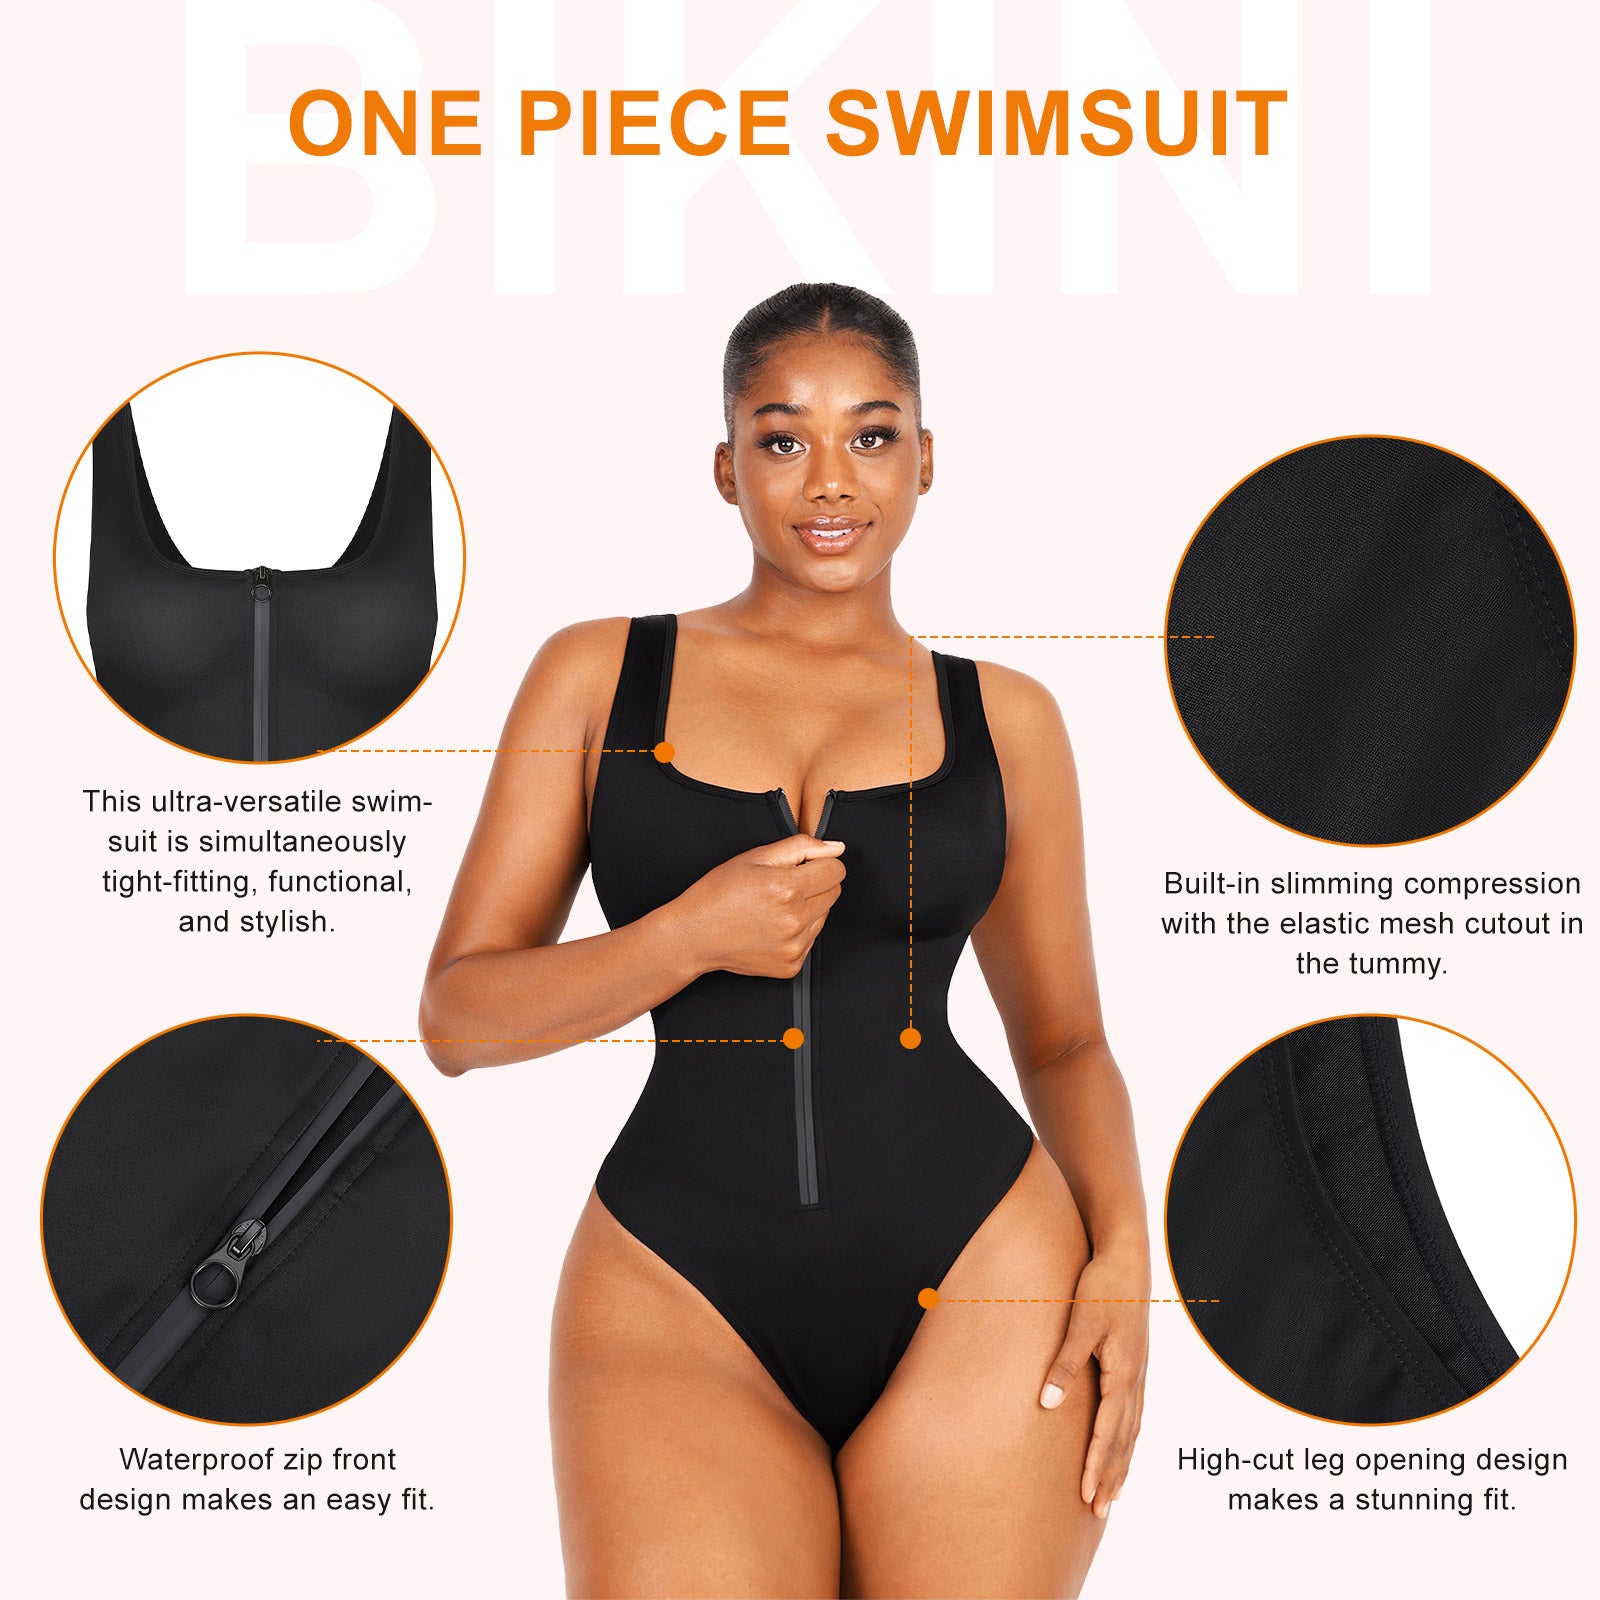 Snatched Swimsuit